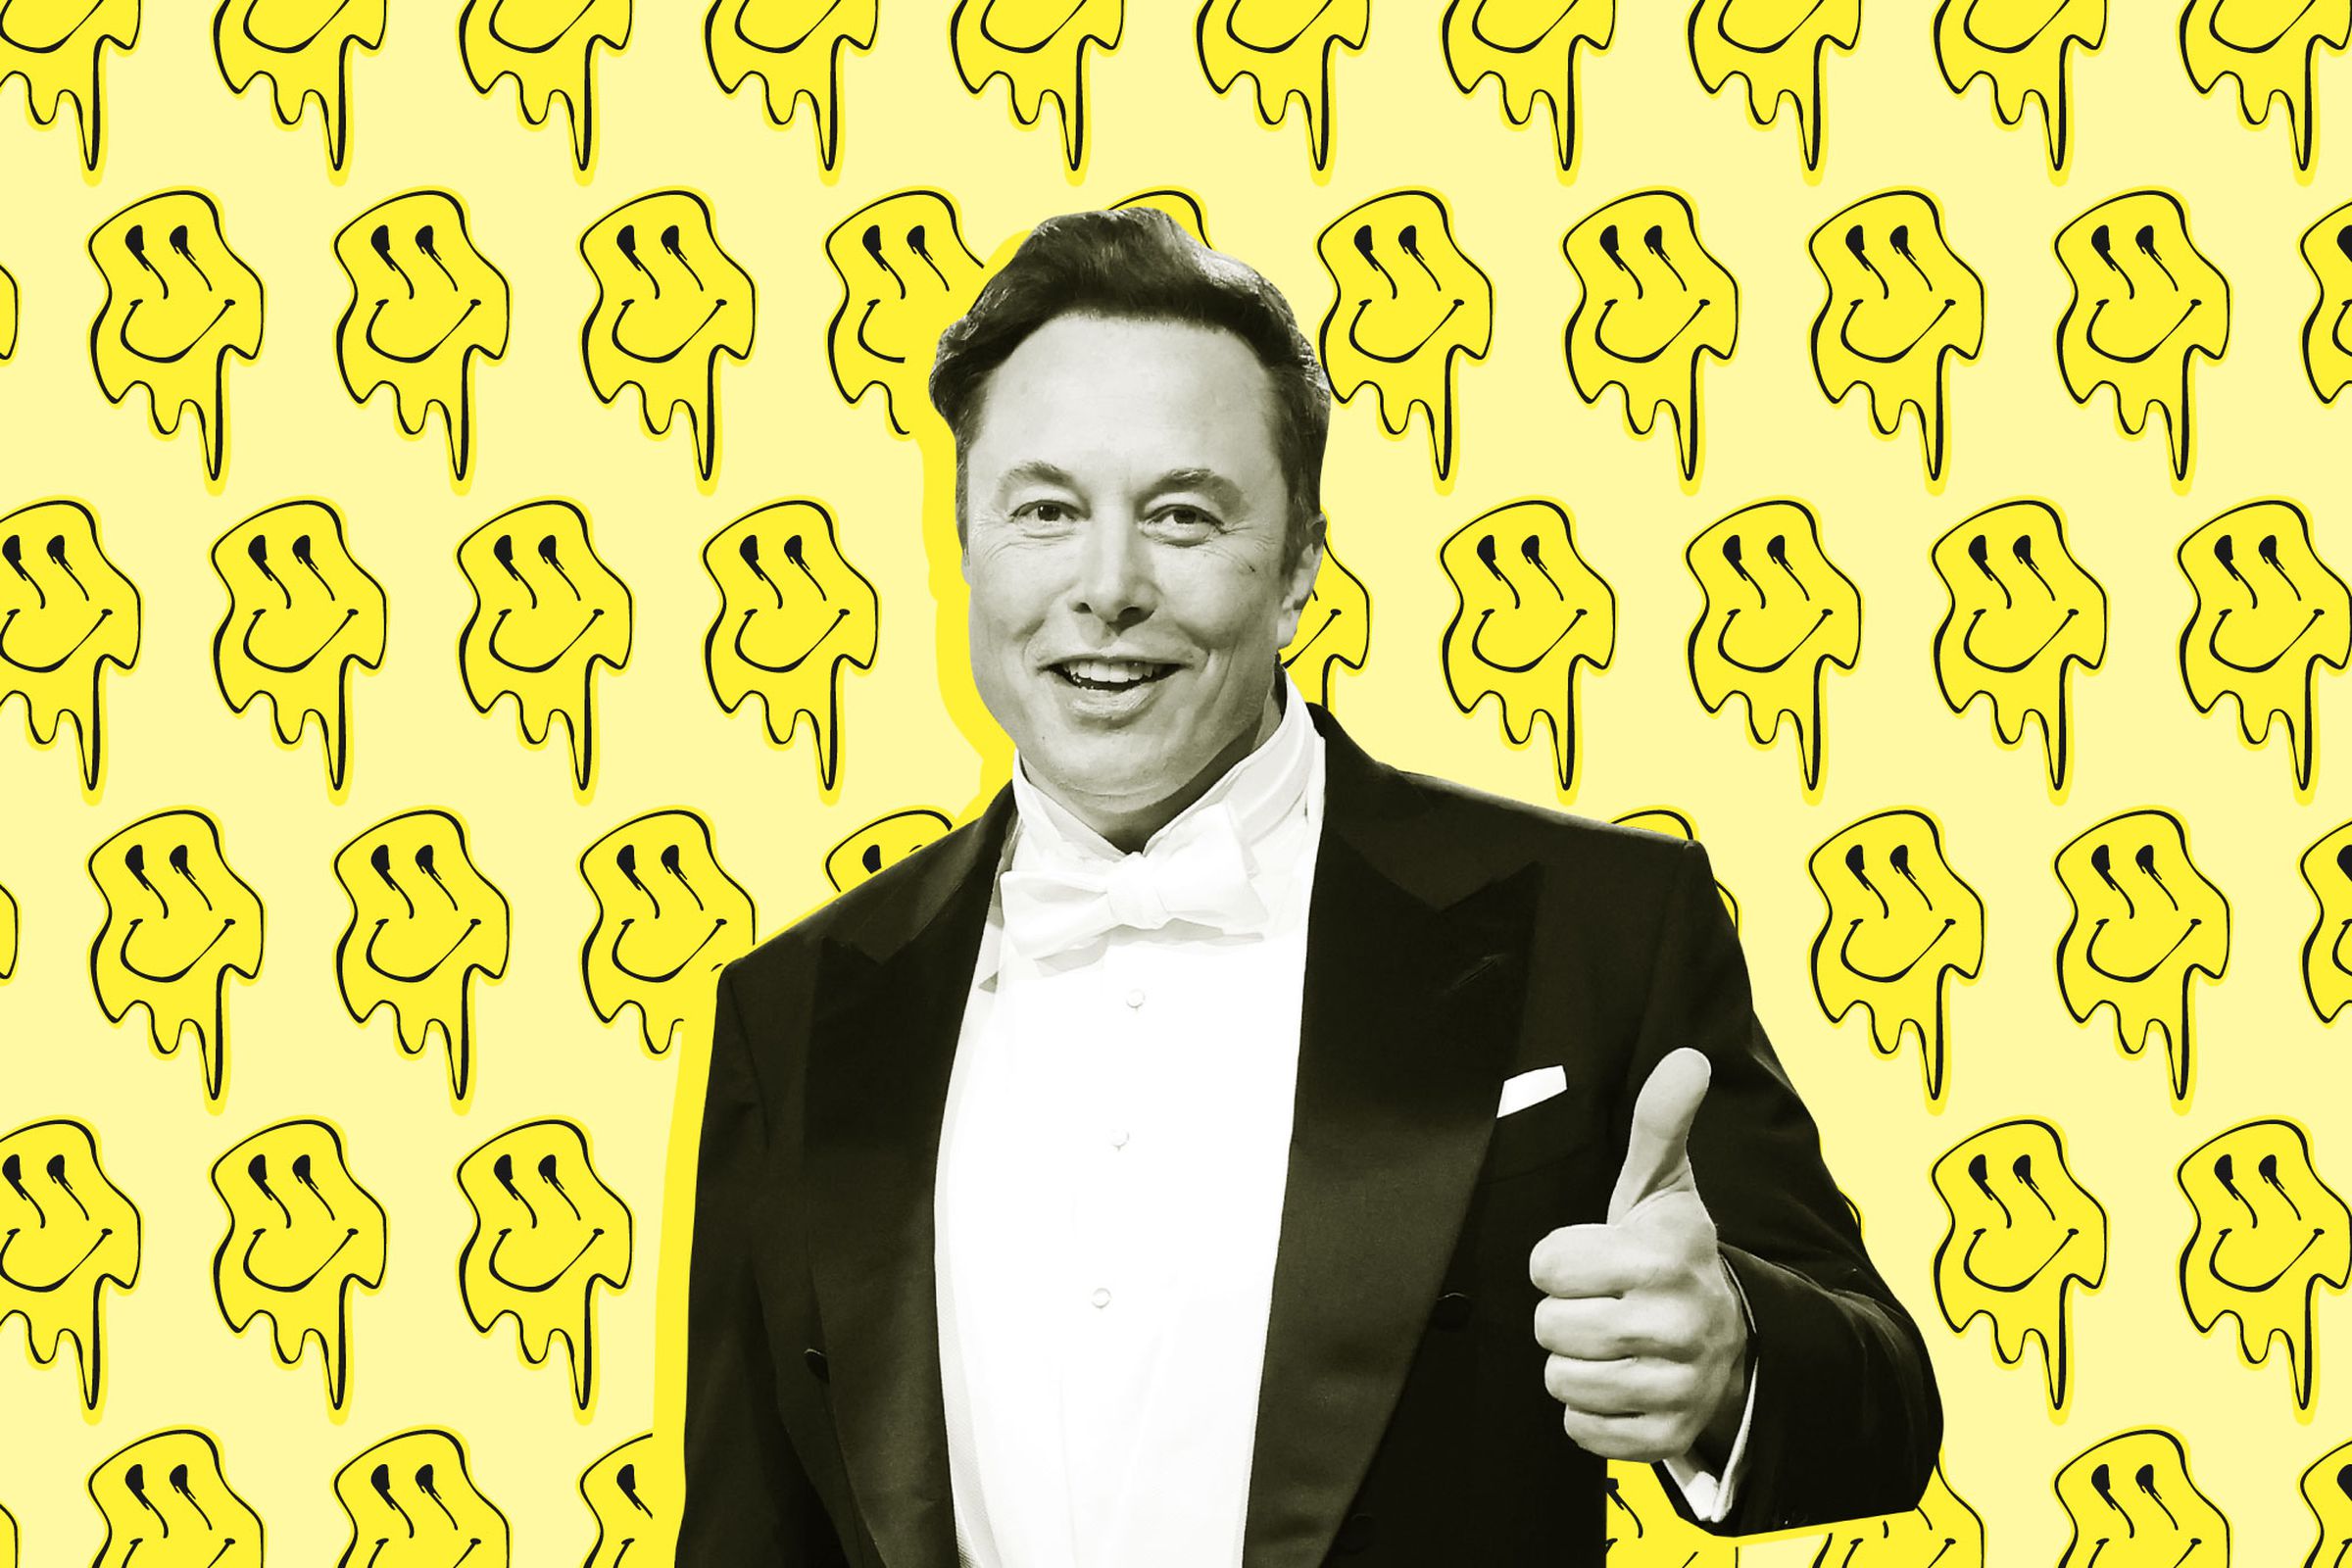 Elon Musk gives a thumbs-up while smiley faces melt in the background